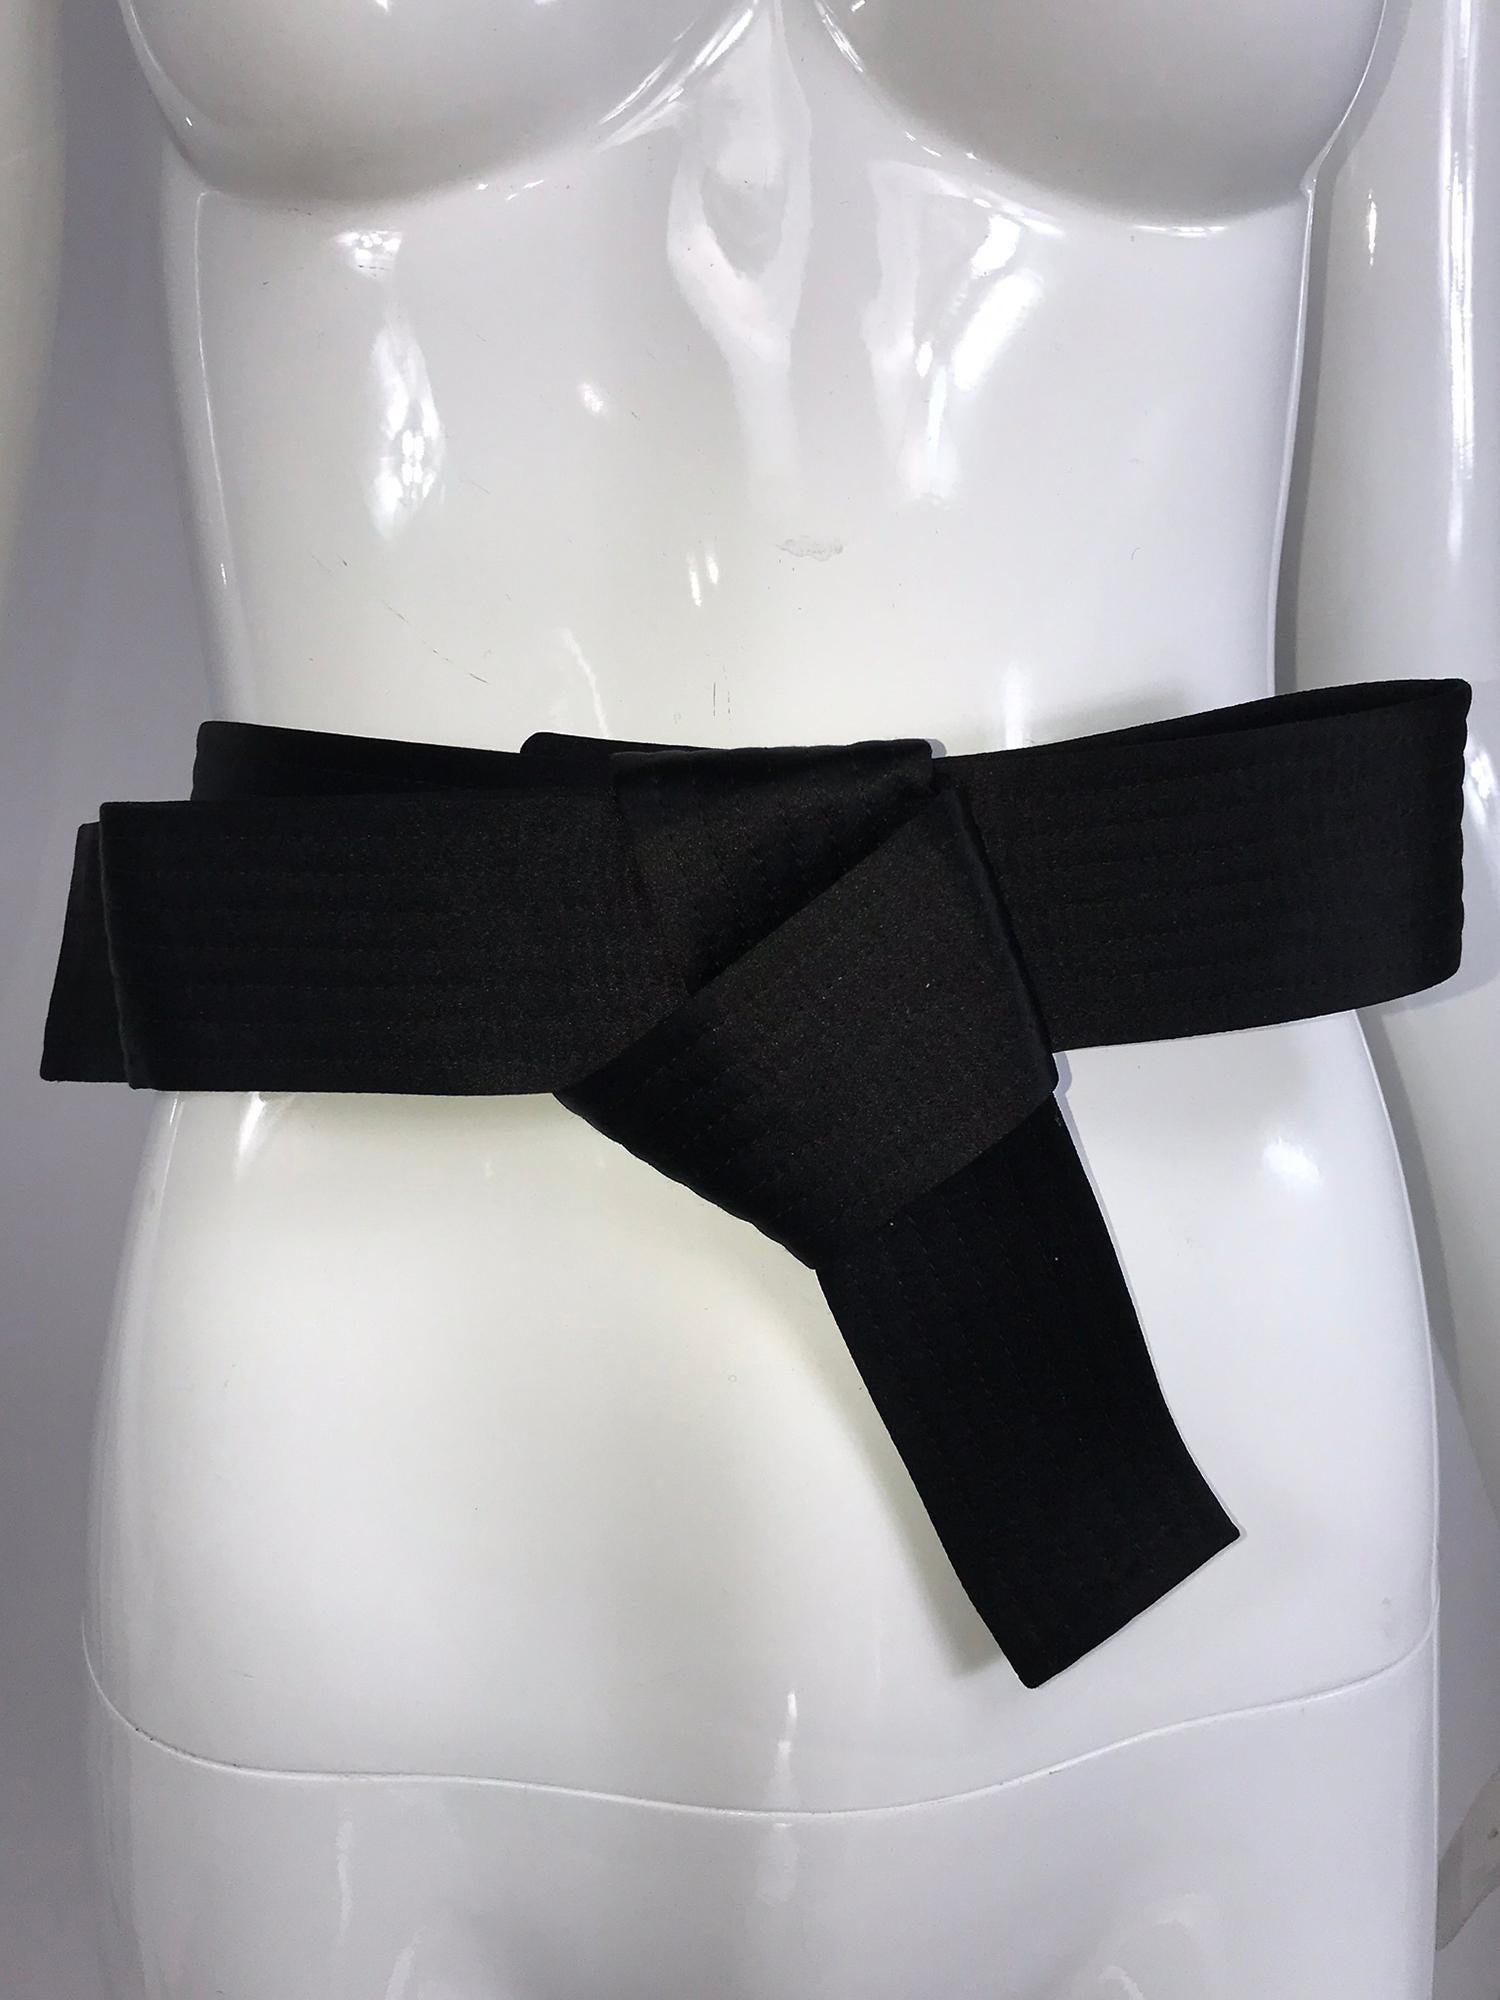 Lanvin wide horizontally quilted black belt in satin with a bow. Worn once, this belt comes with the box and tags. The belt will add the final touch to a special outfit or dress. In excellent condition. The belt adjusts and closes with hidden hooks